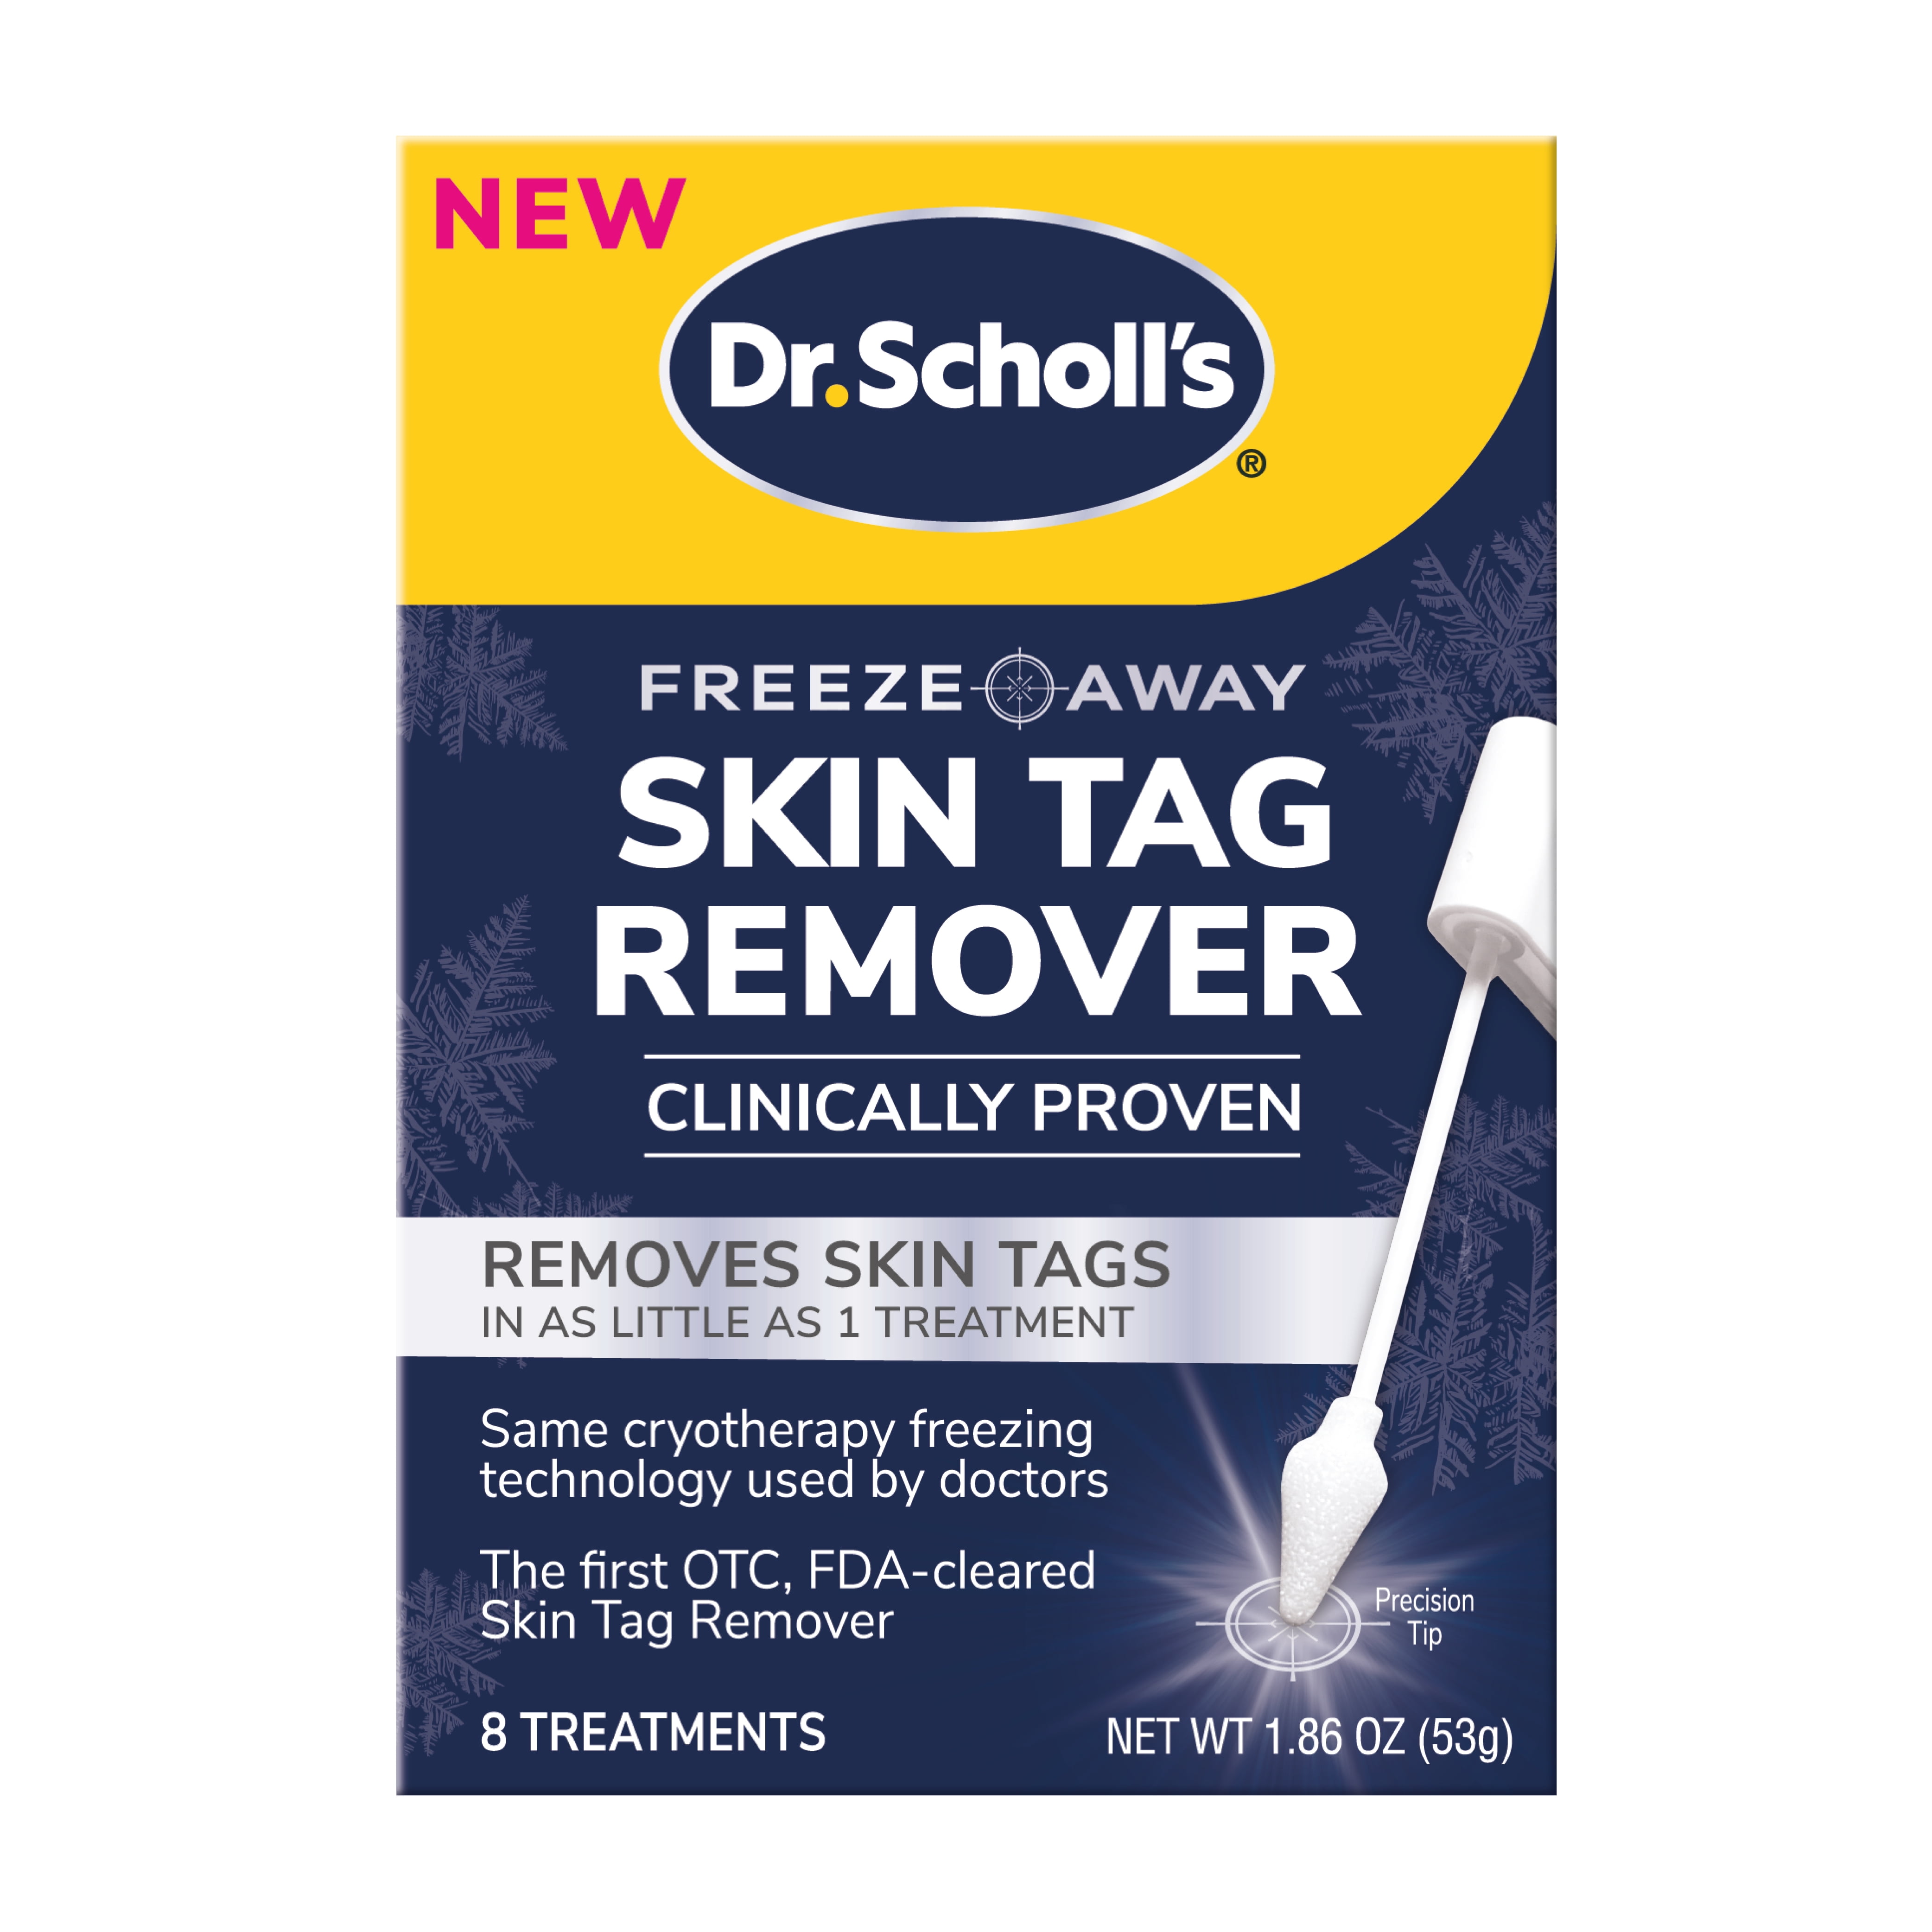 12 Hour Wart Remover Pen Skin Tag Mole Remover Eliminate Foot Corn Wart  Painless